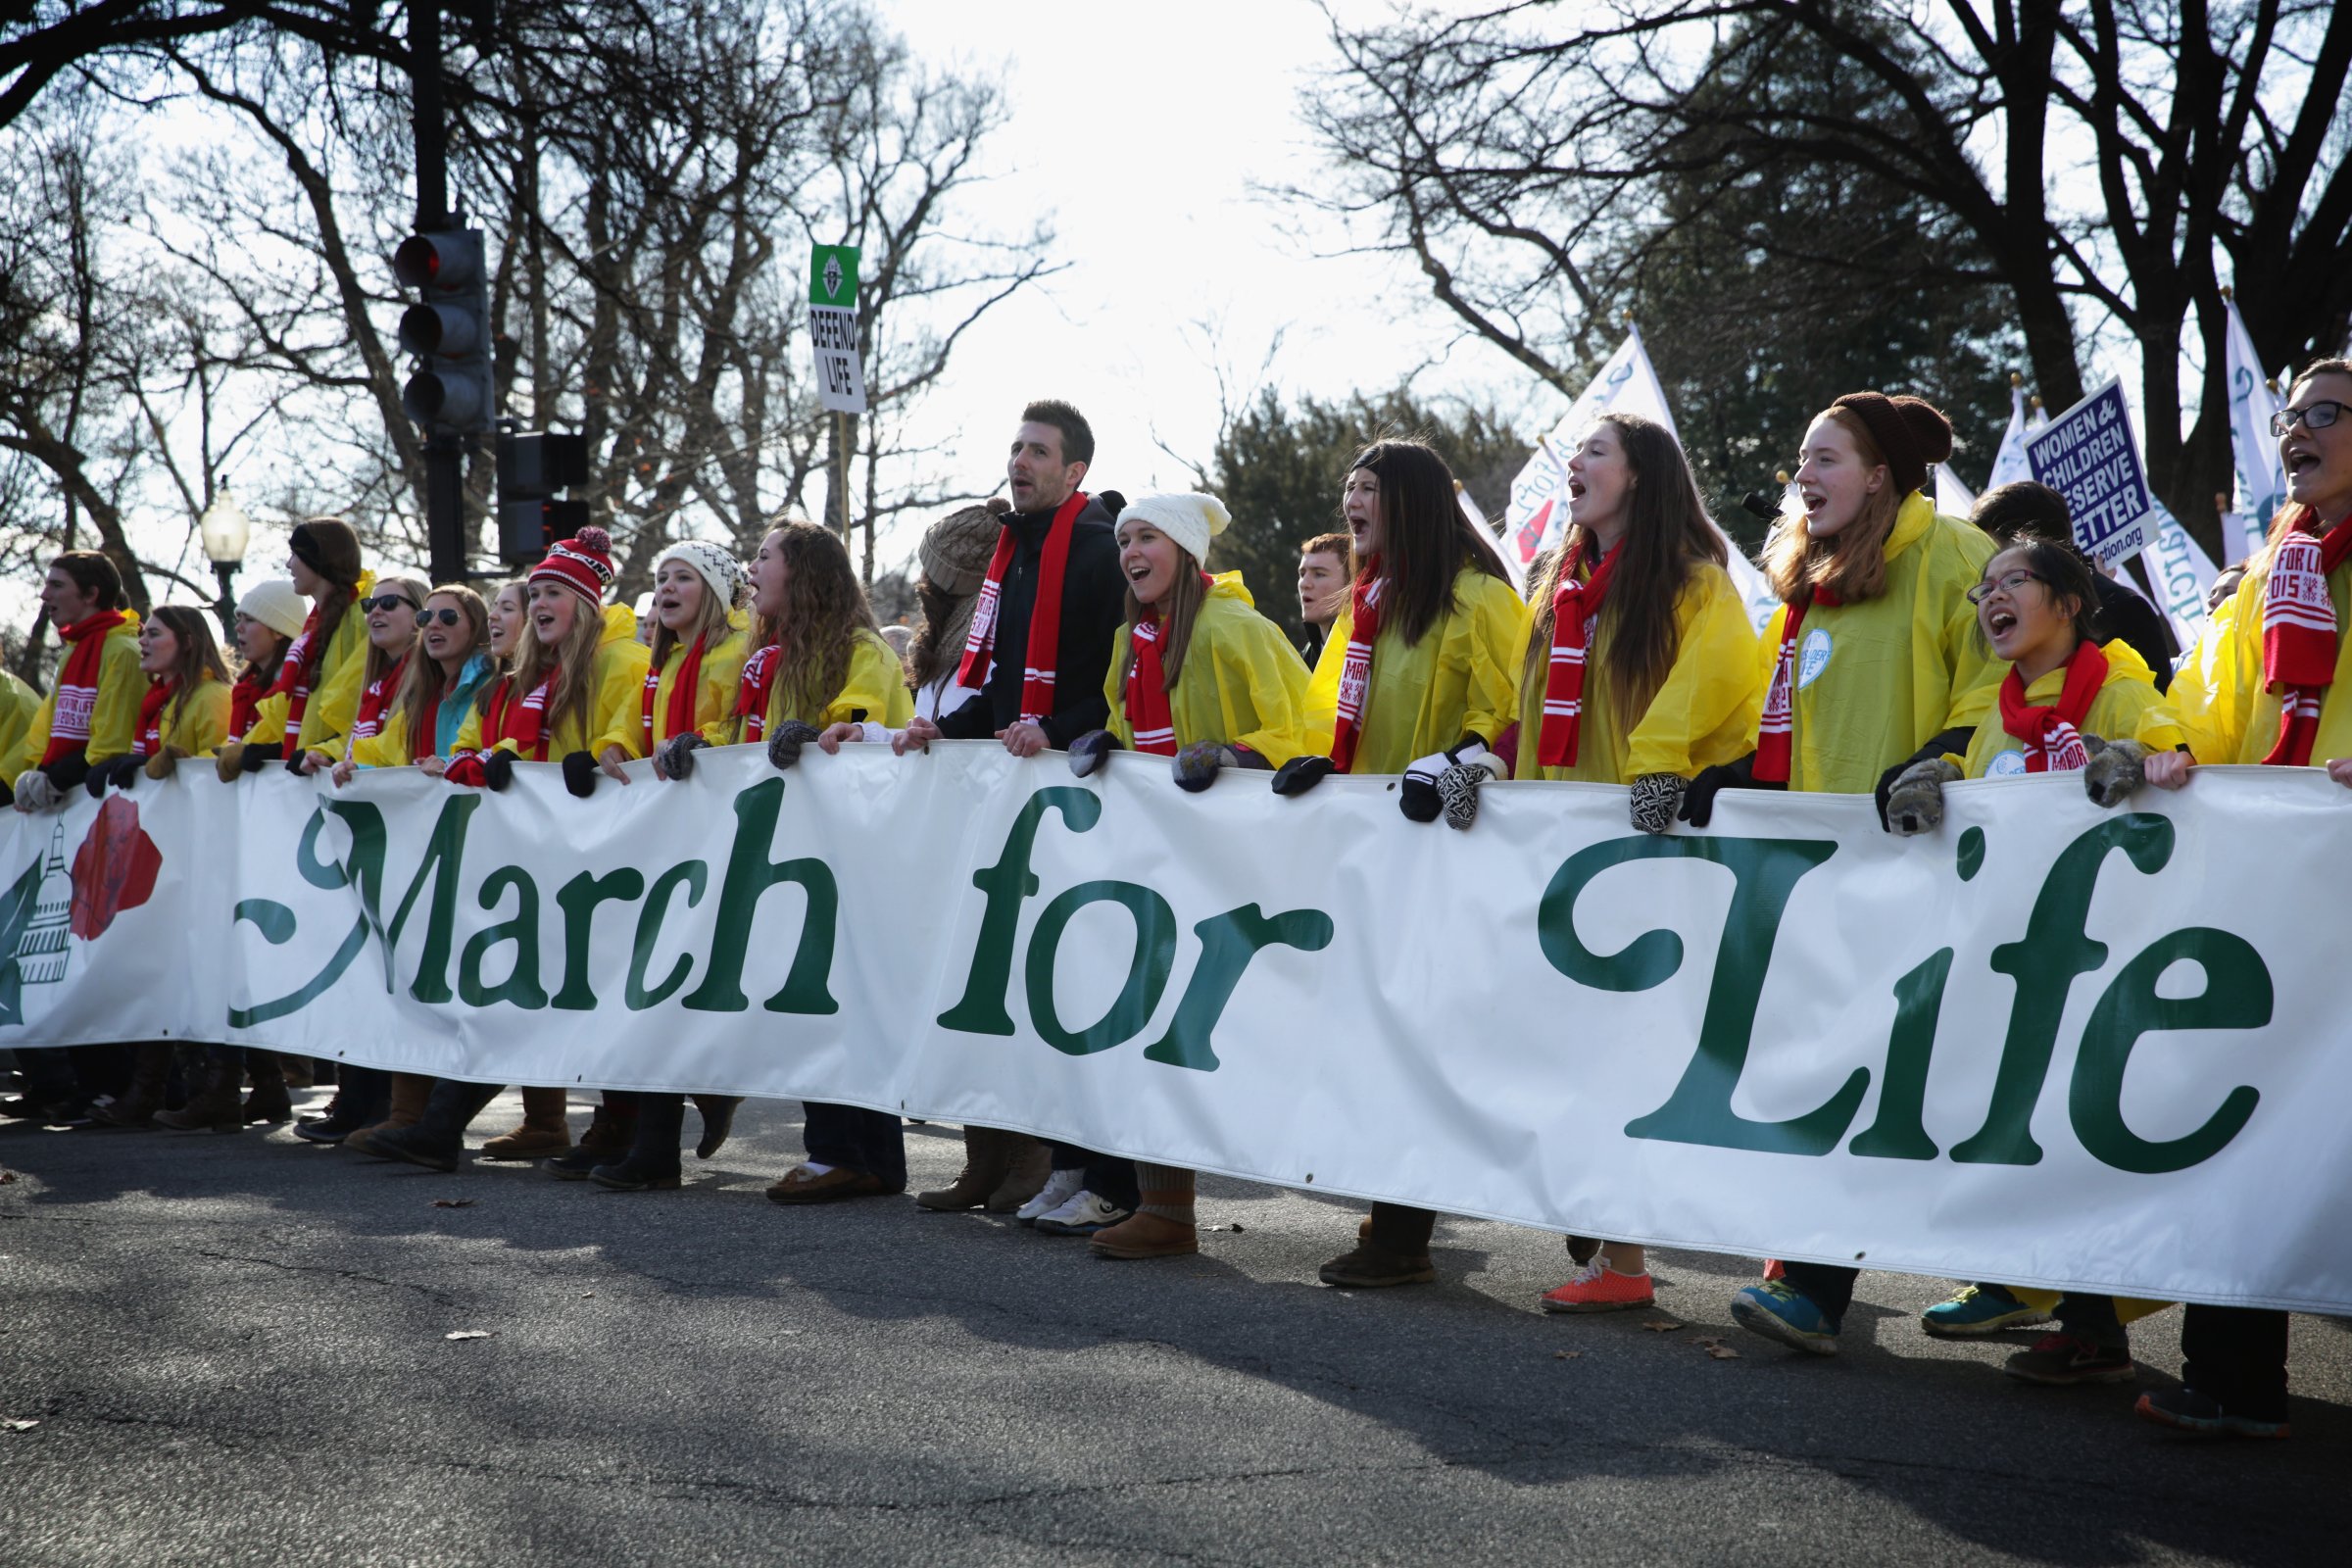 Activists participate in the annual March for Life as they pass in front of the U.S. Capitol in Washington, D.C., on Jan. 22, 2015.